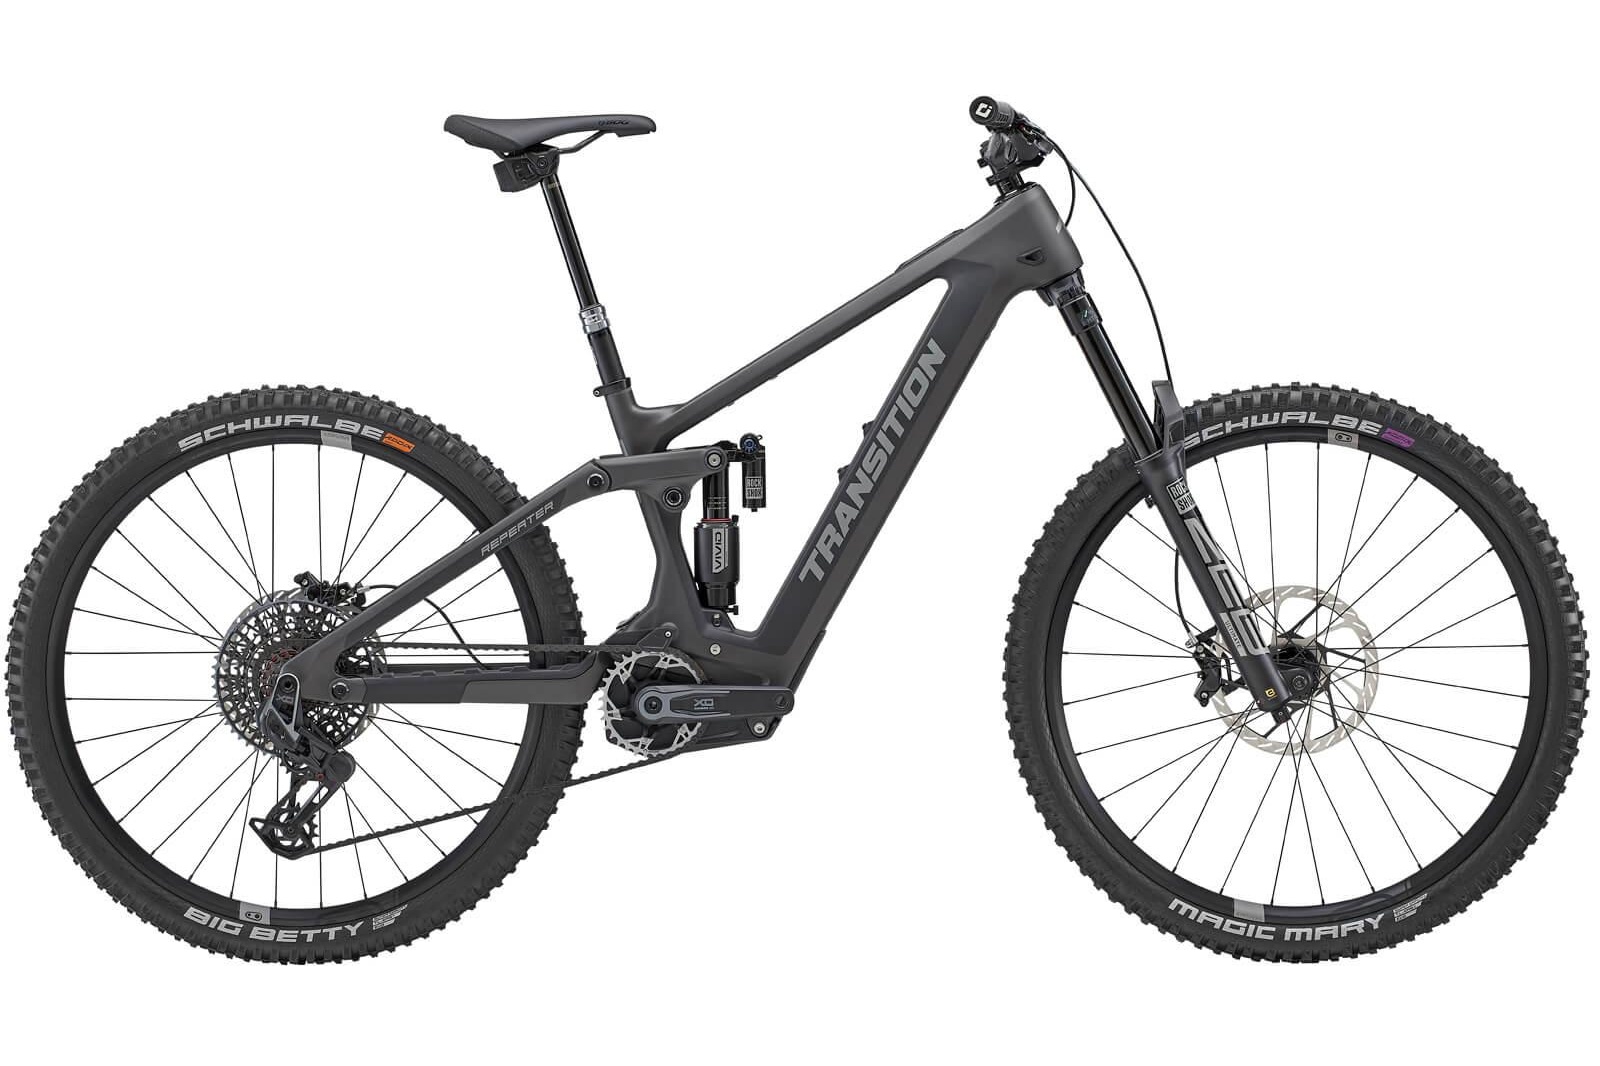 Transition Repeater Carbon XO axs im Test